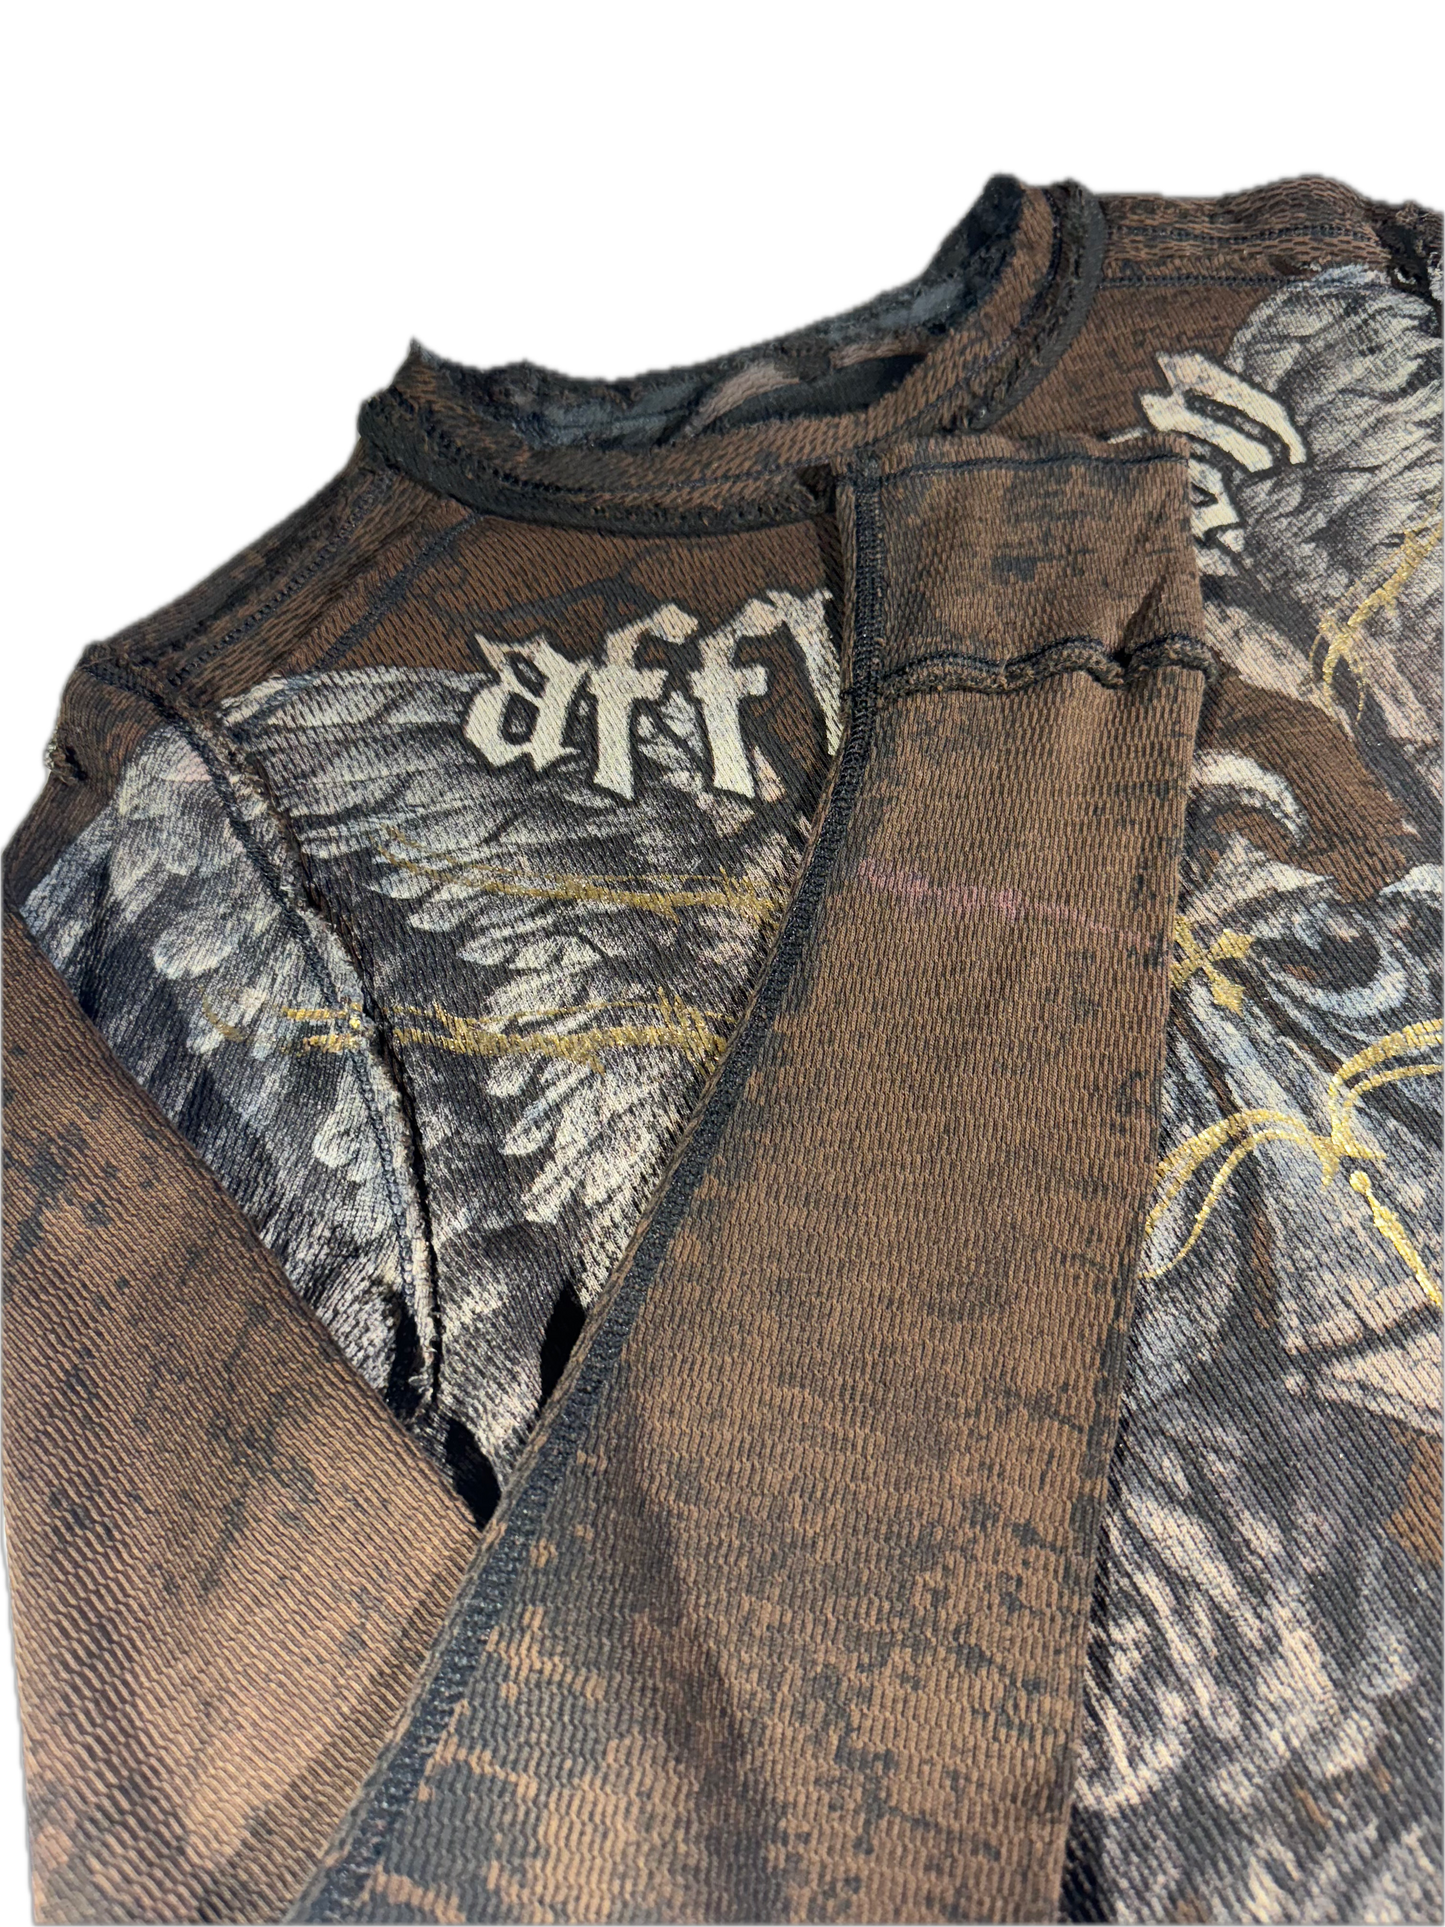 Vintage Affliction Top Long-Sleeve Exsposed Stitching